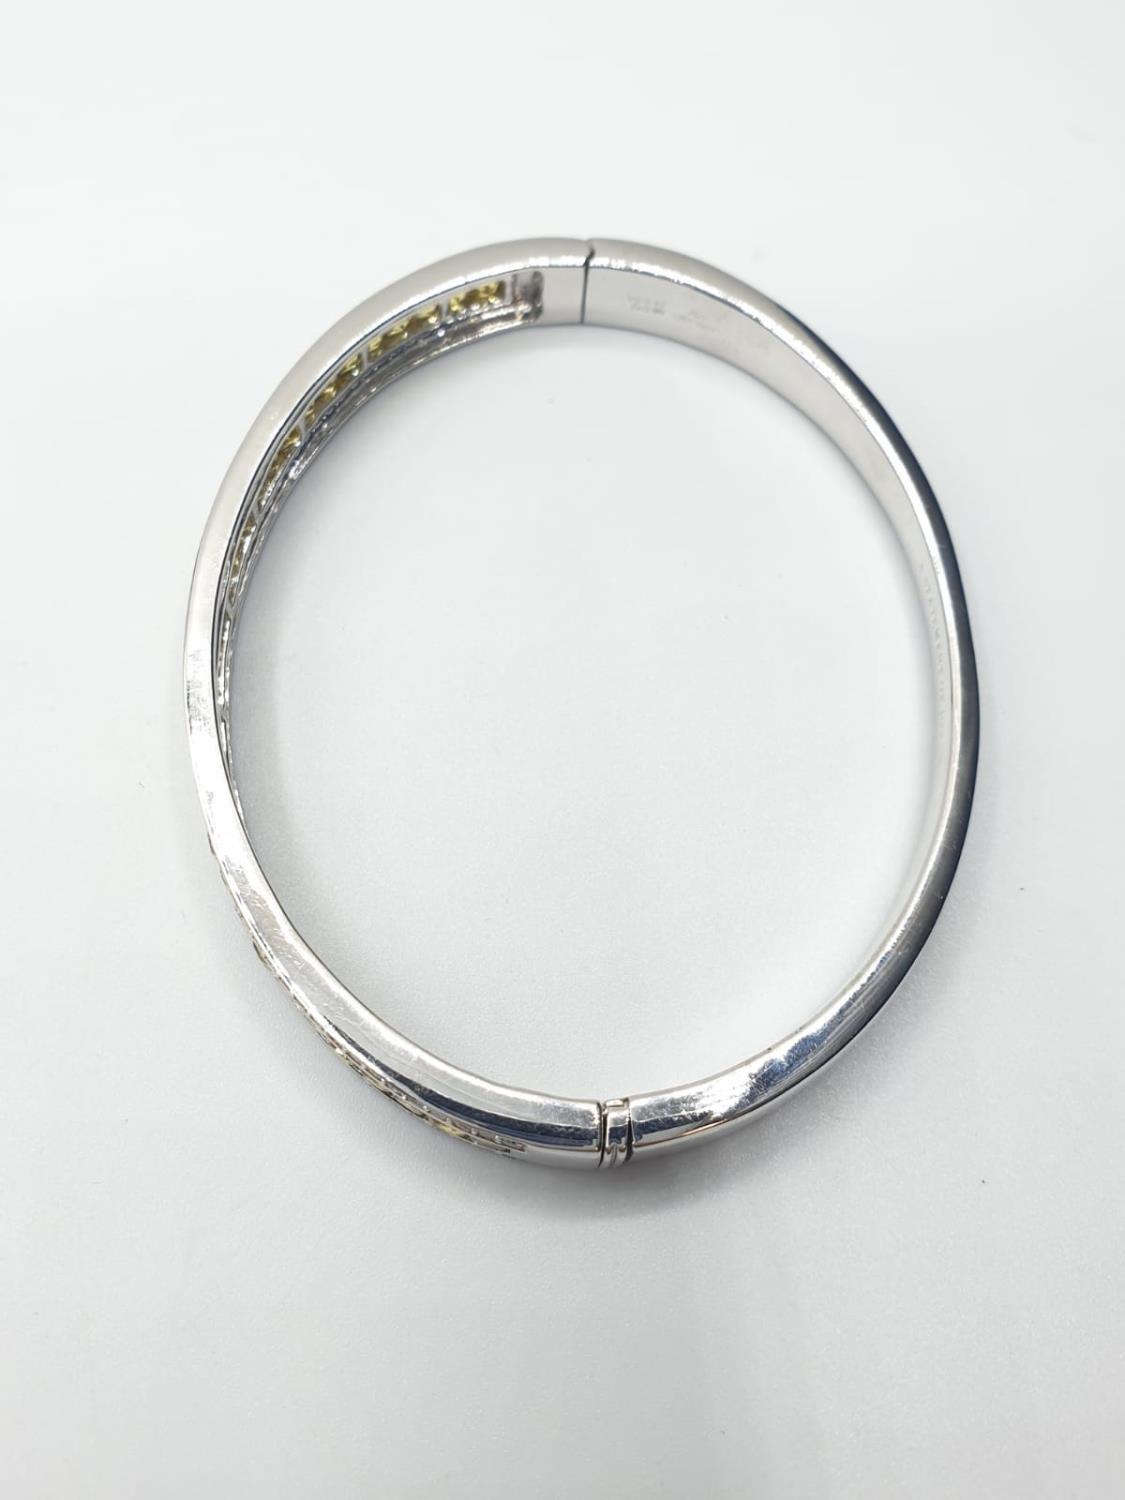 18ct White Gold Hinged Bangle with Channel Set Diamond ( 0.90ct) and Yellow Sapphire Designed by - Image 4 of 5